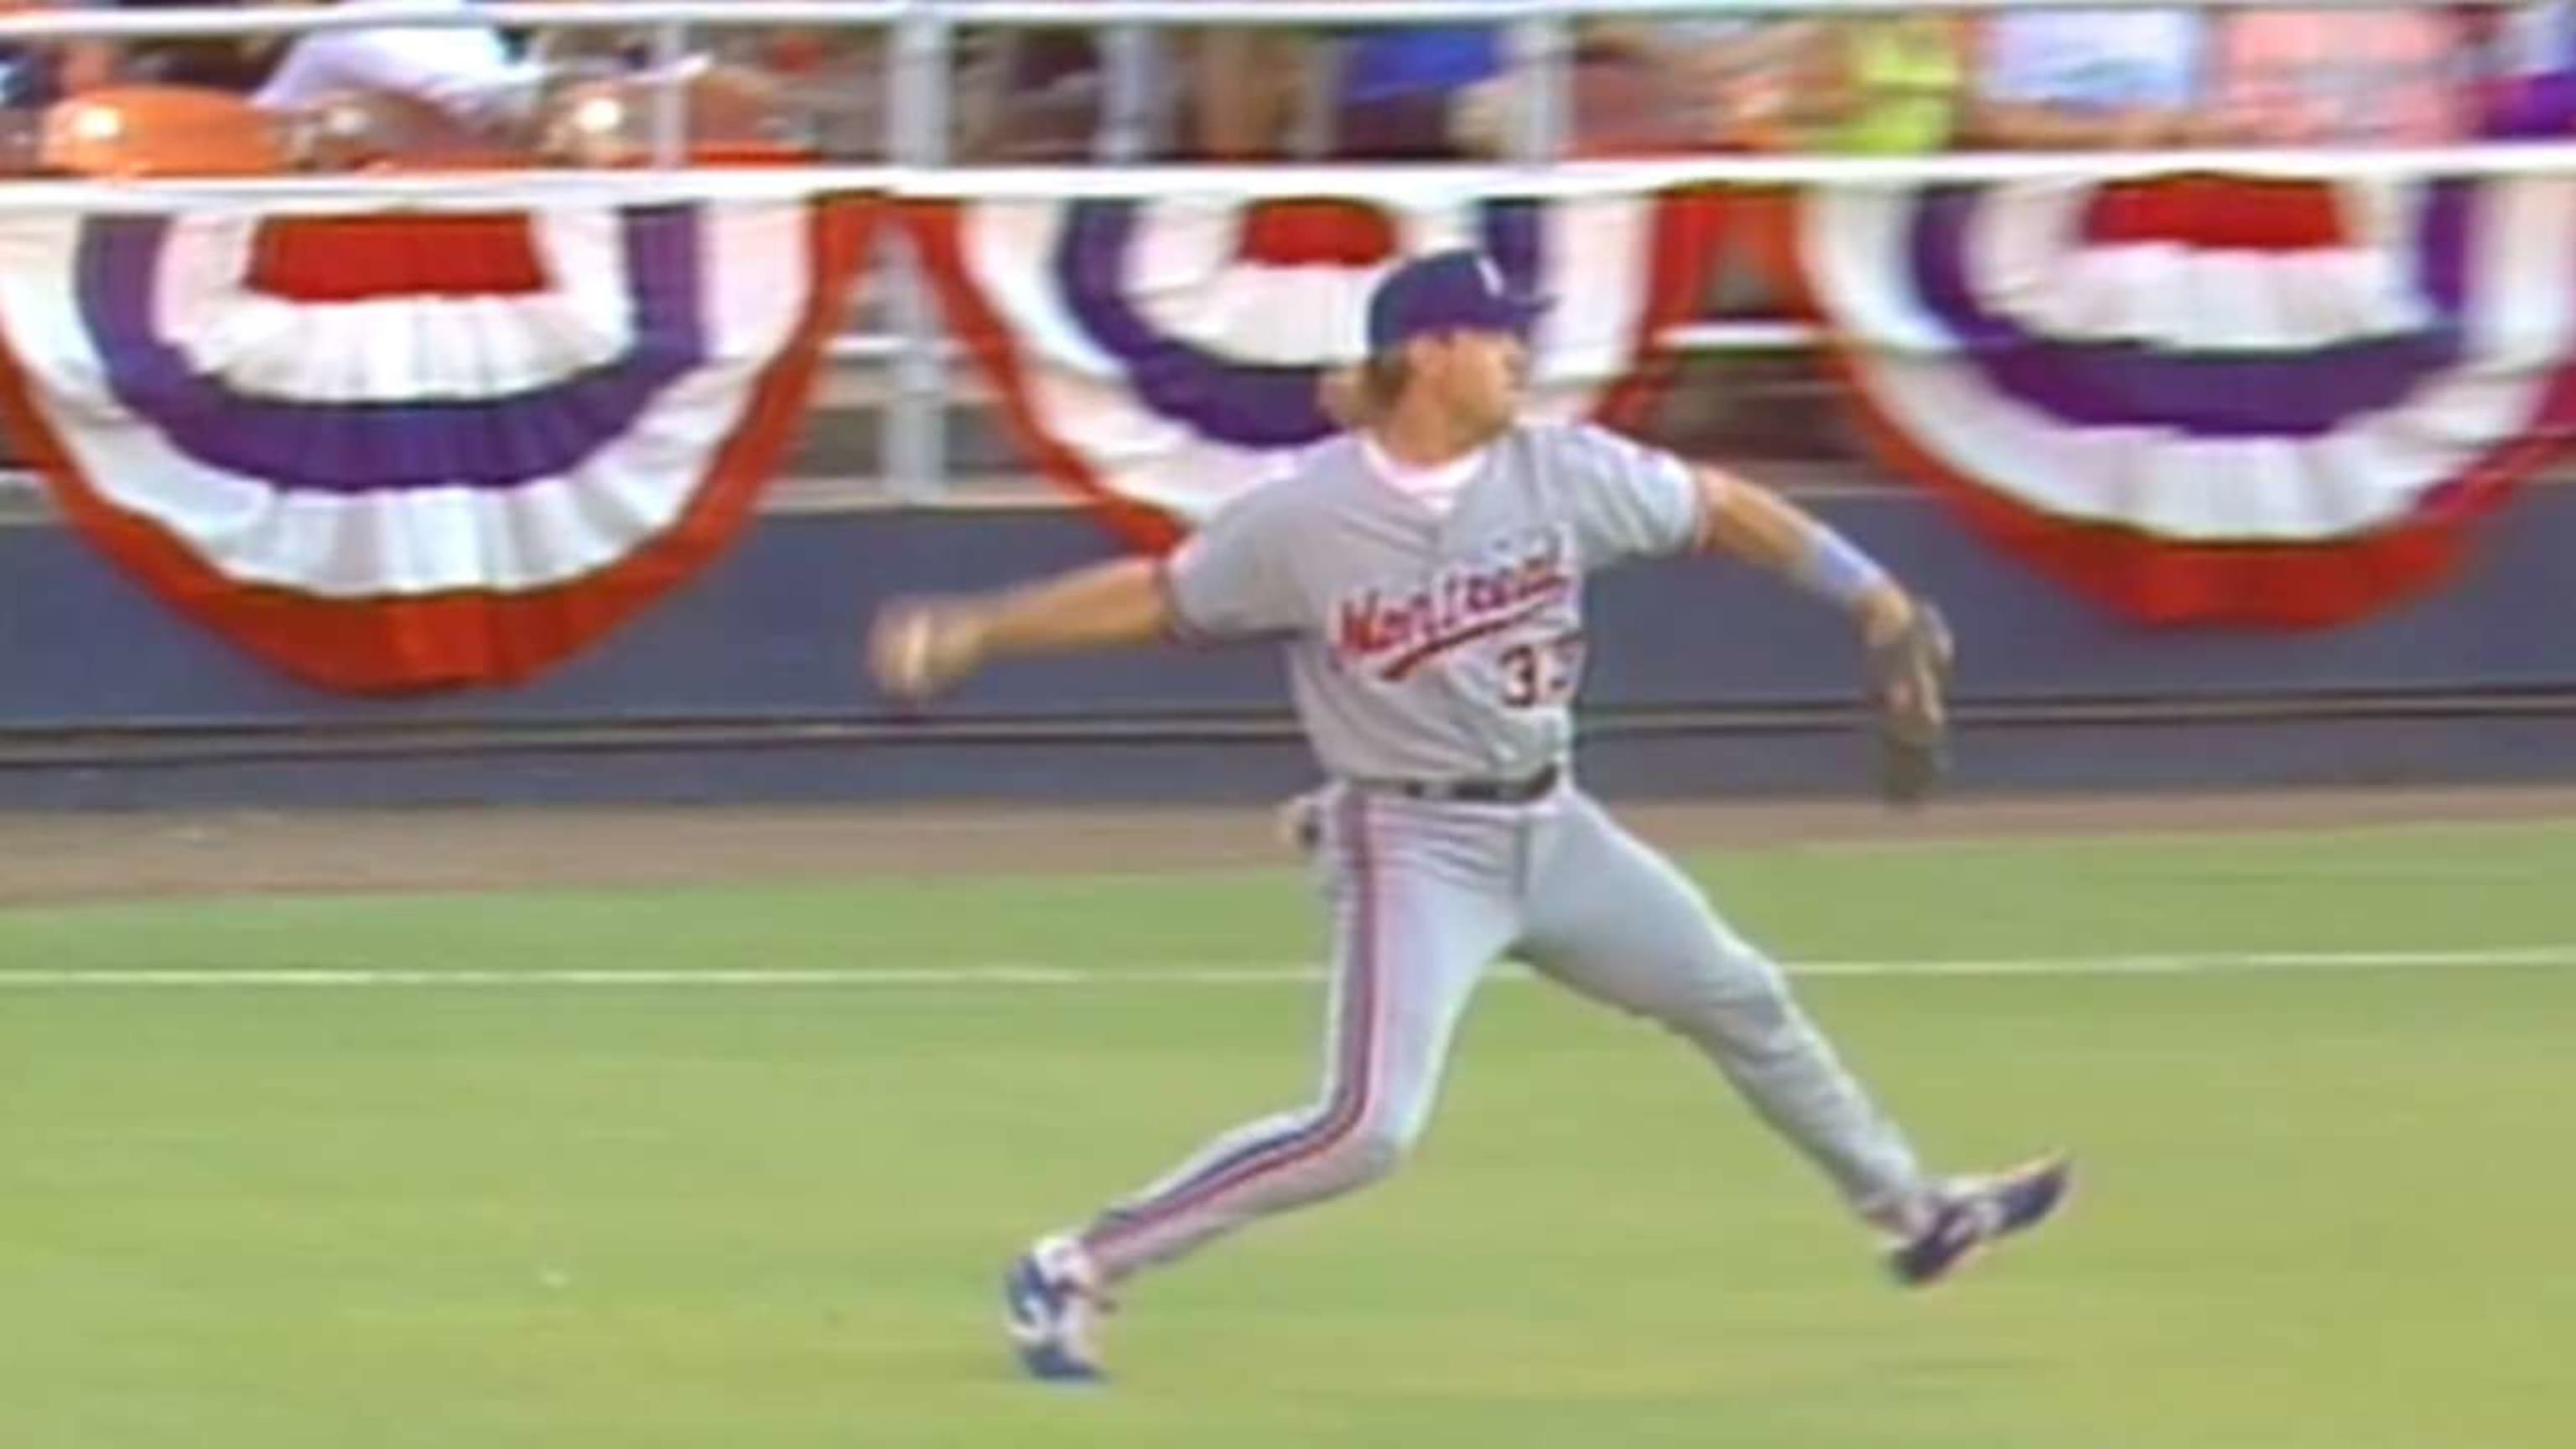 The significance of Larry Walker's Hall of Fame election